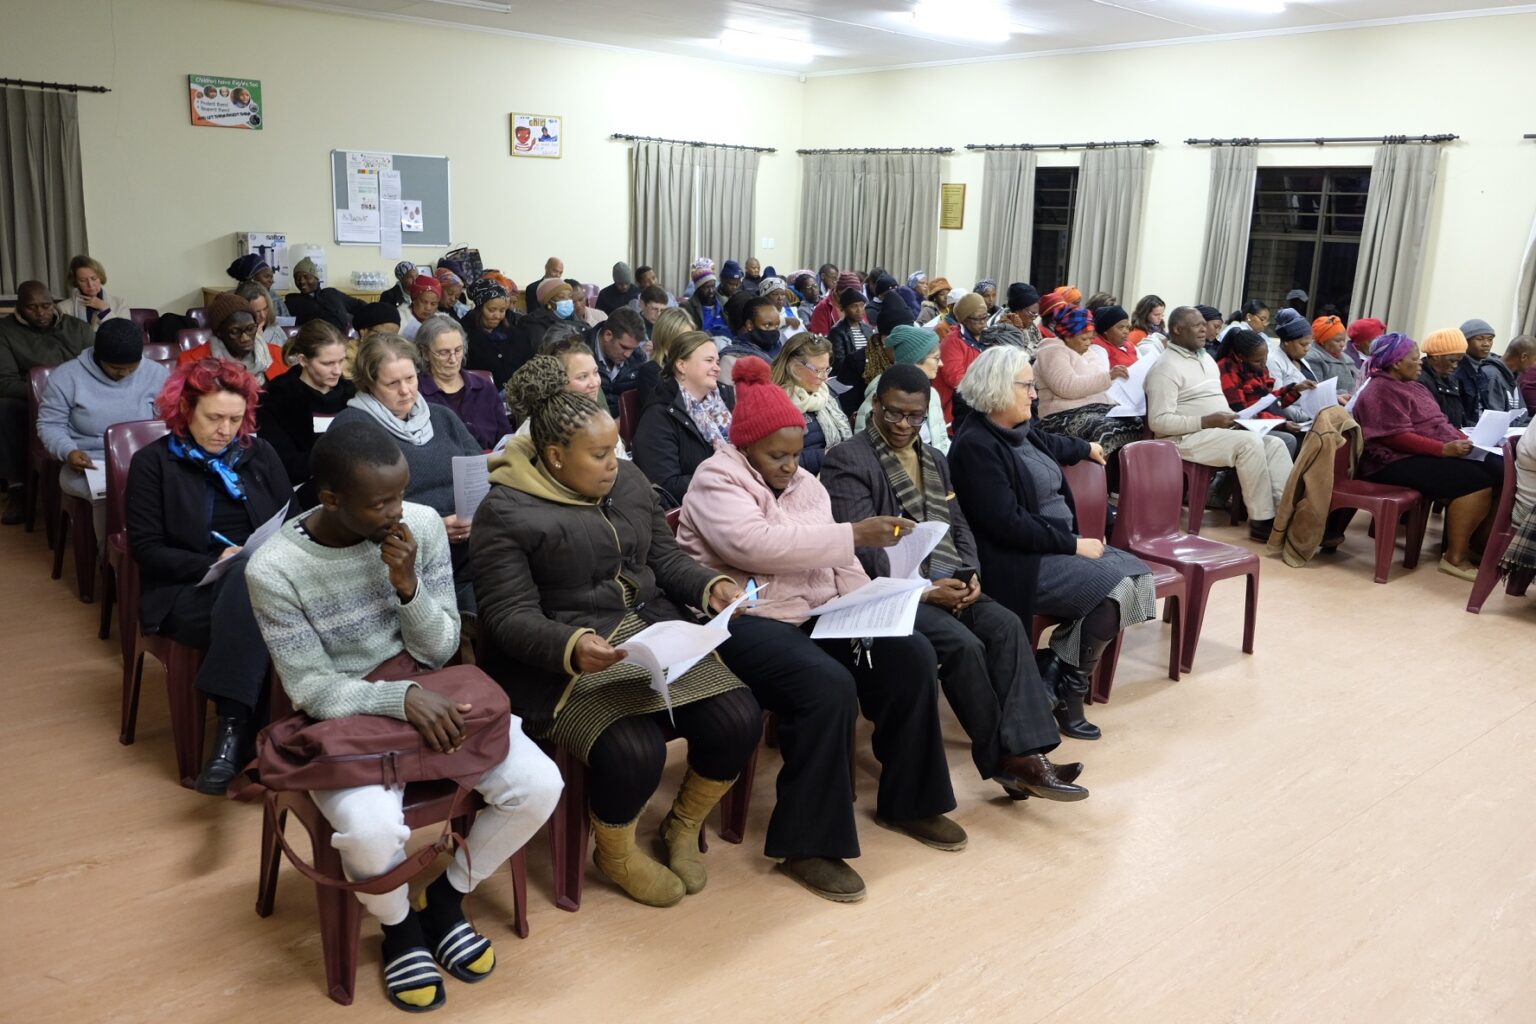 A large group of educationalists, parents and students turned out for the GADRA Education AGM in Joza on Tuesday, 23 May.